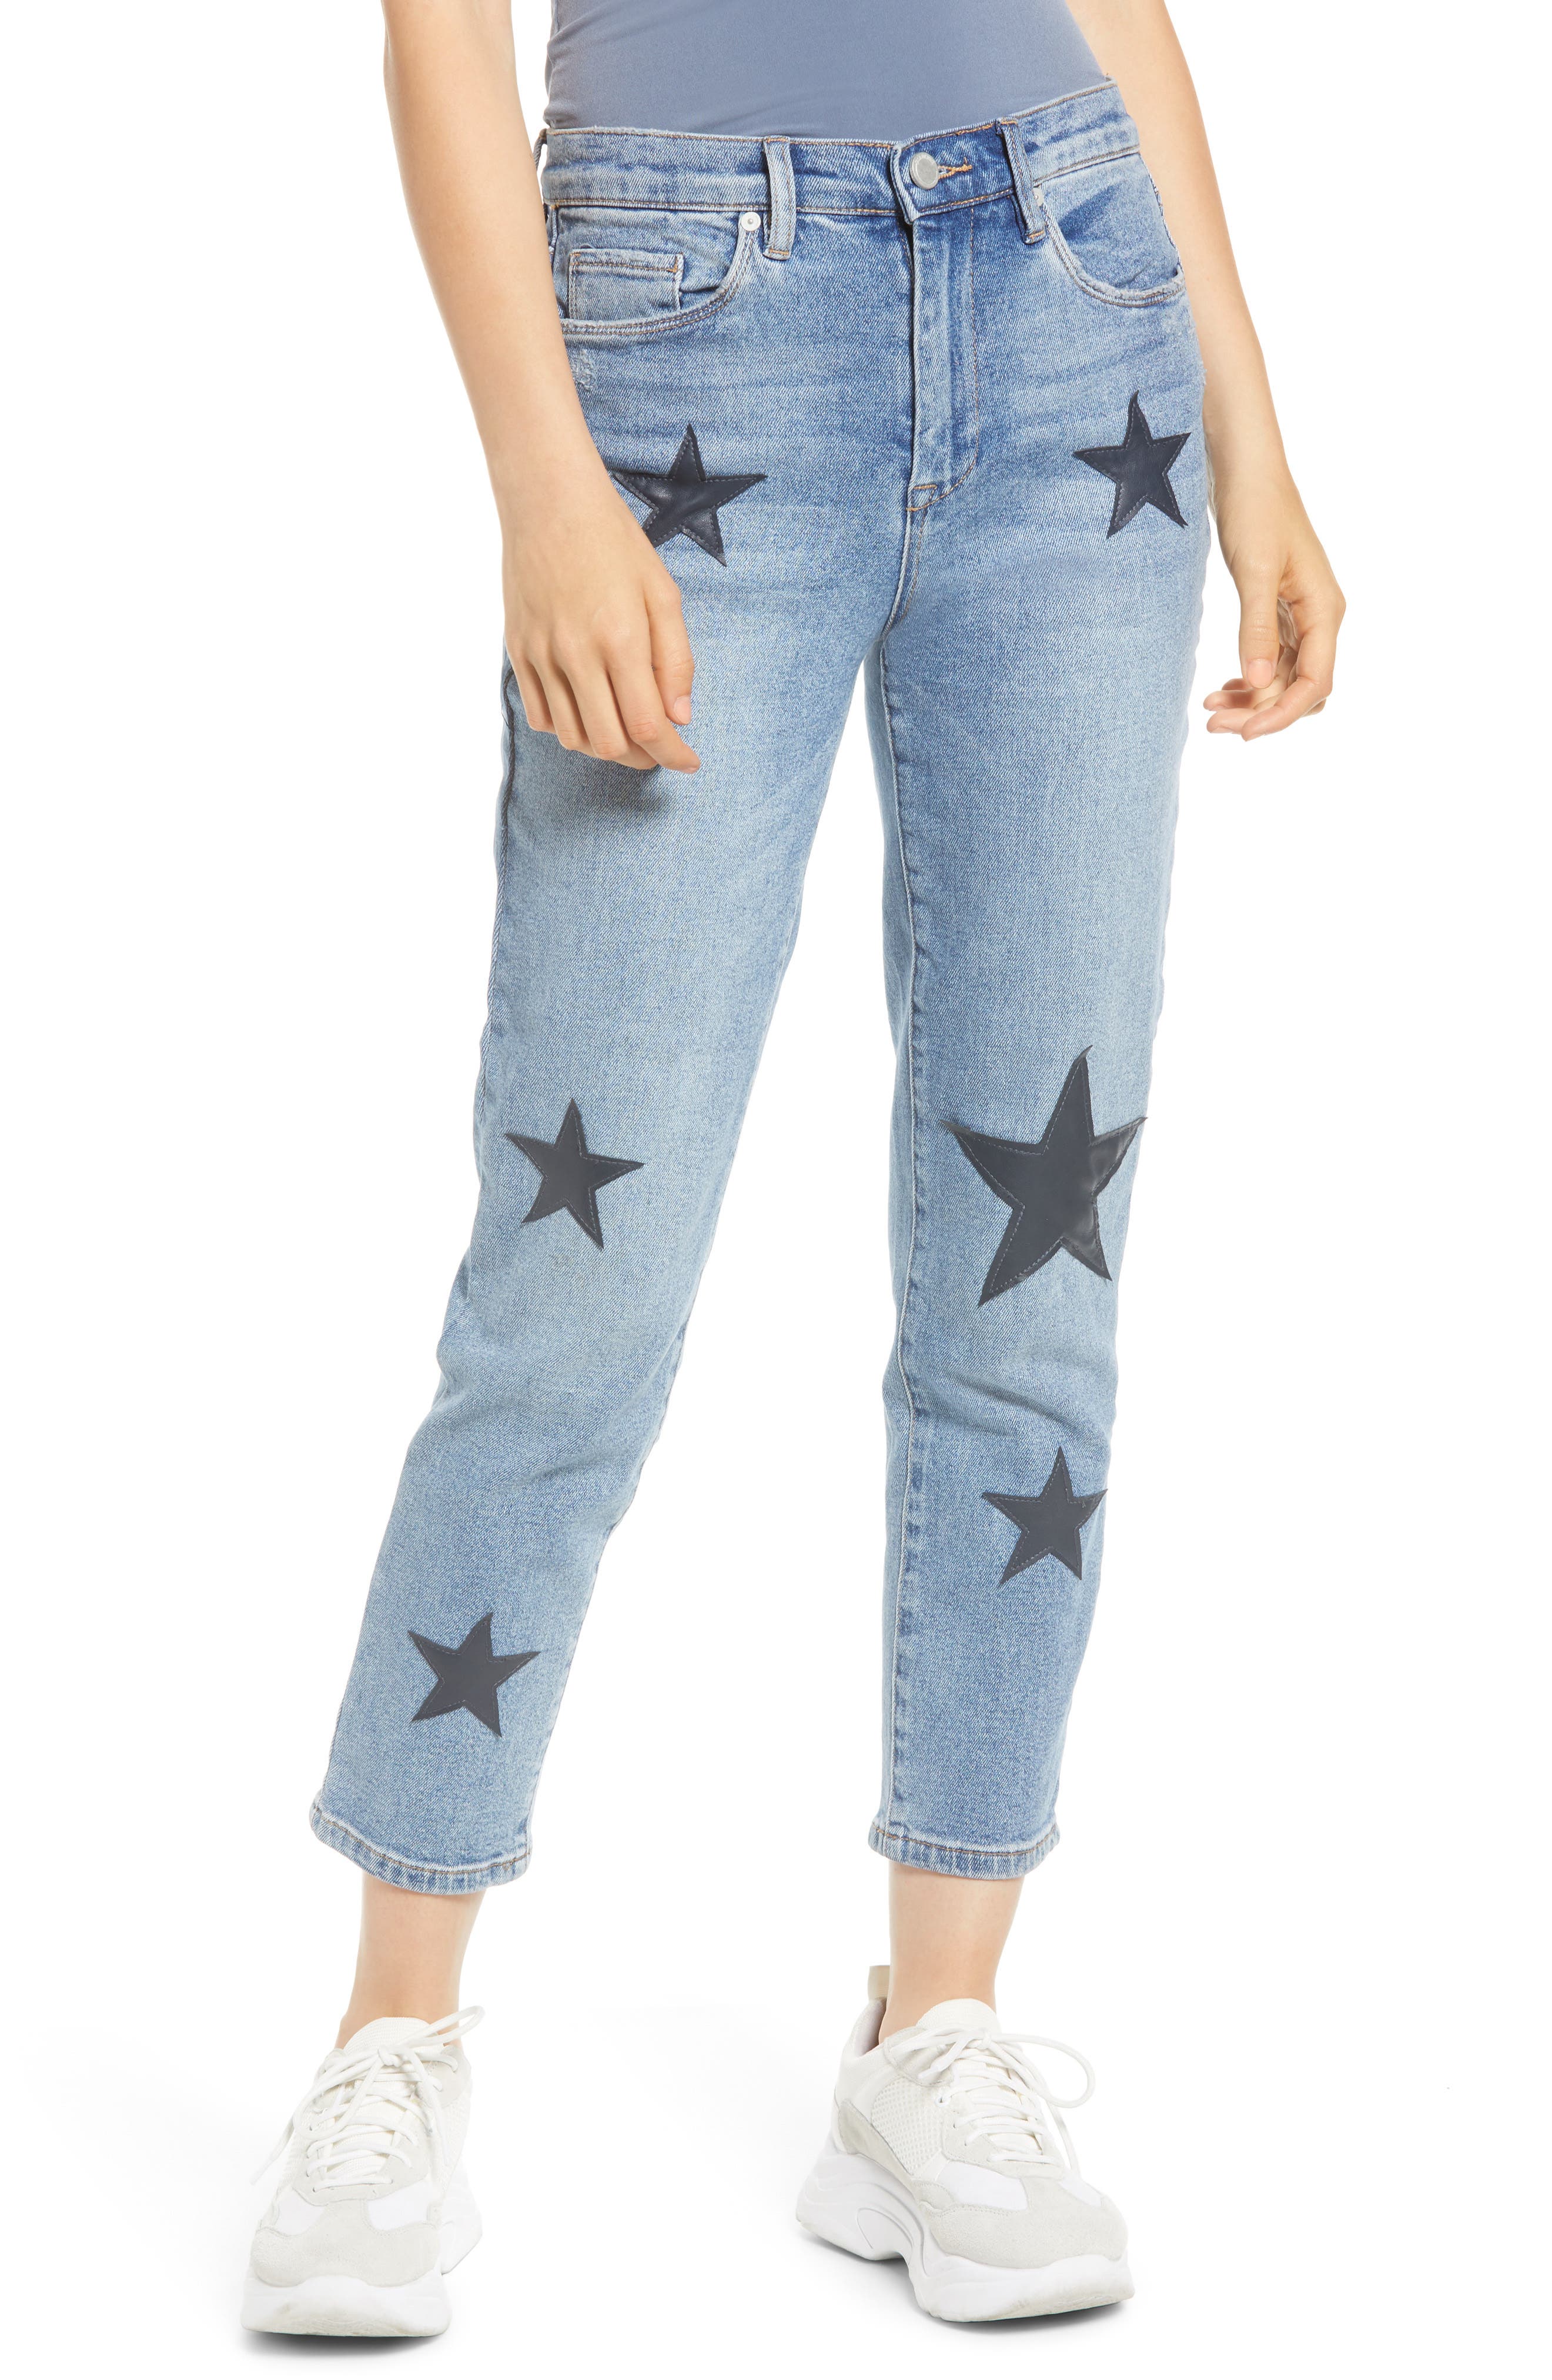 jeans with stars